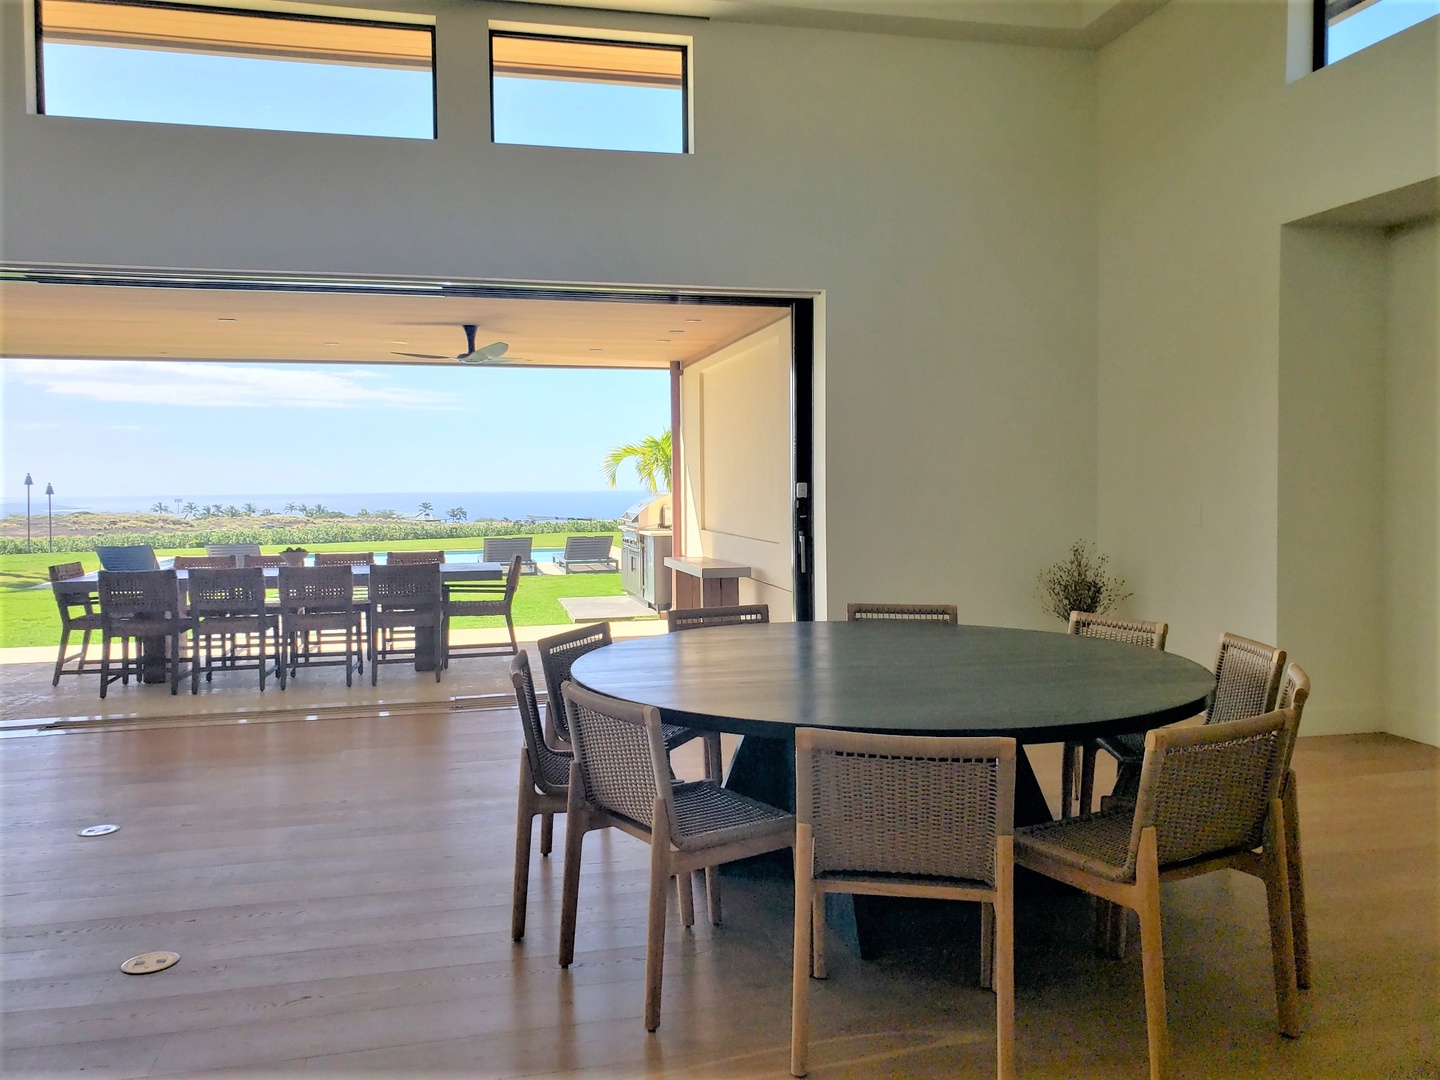 Kamuela Vacation Rentals, Hapuna Estates #8 - Views of the ocean from the dining area